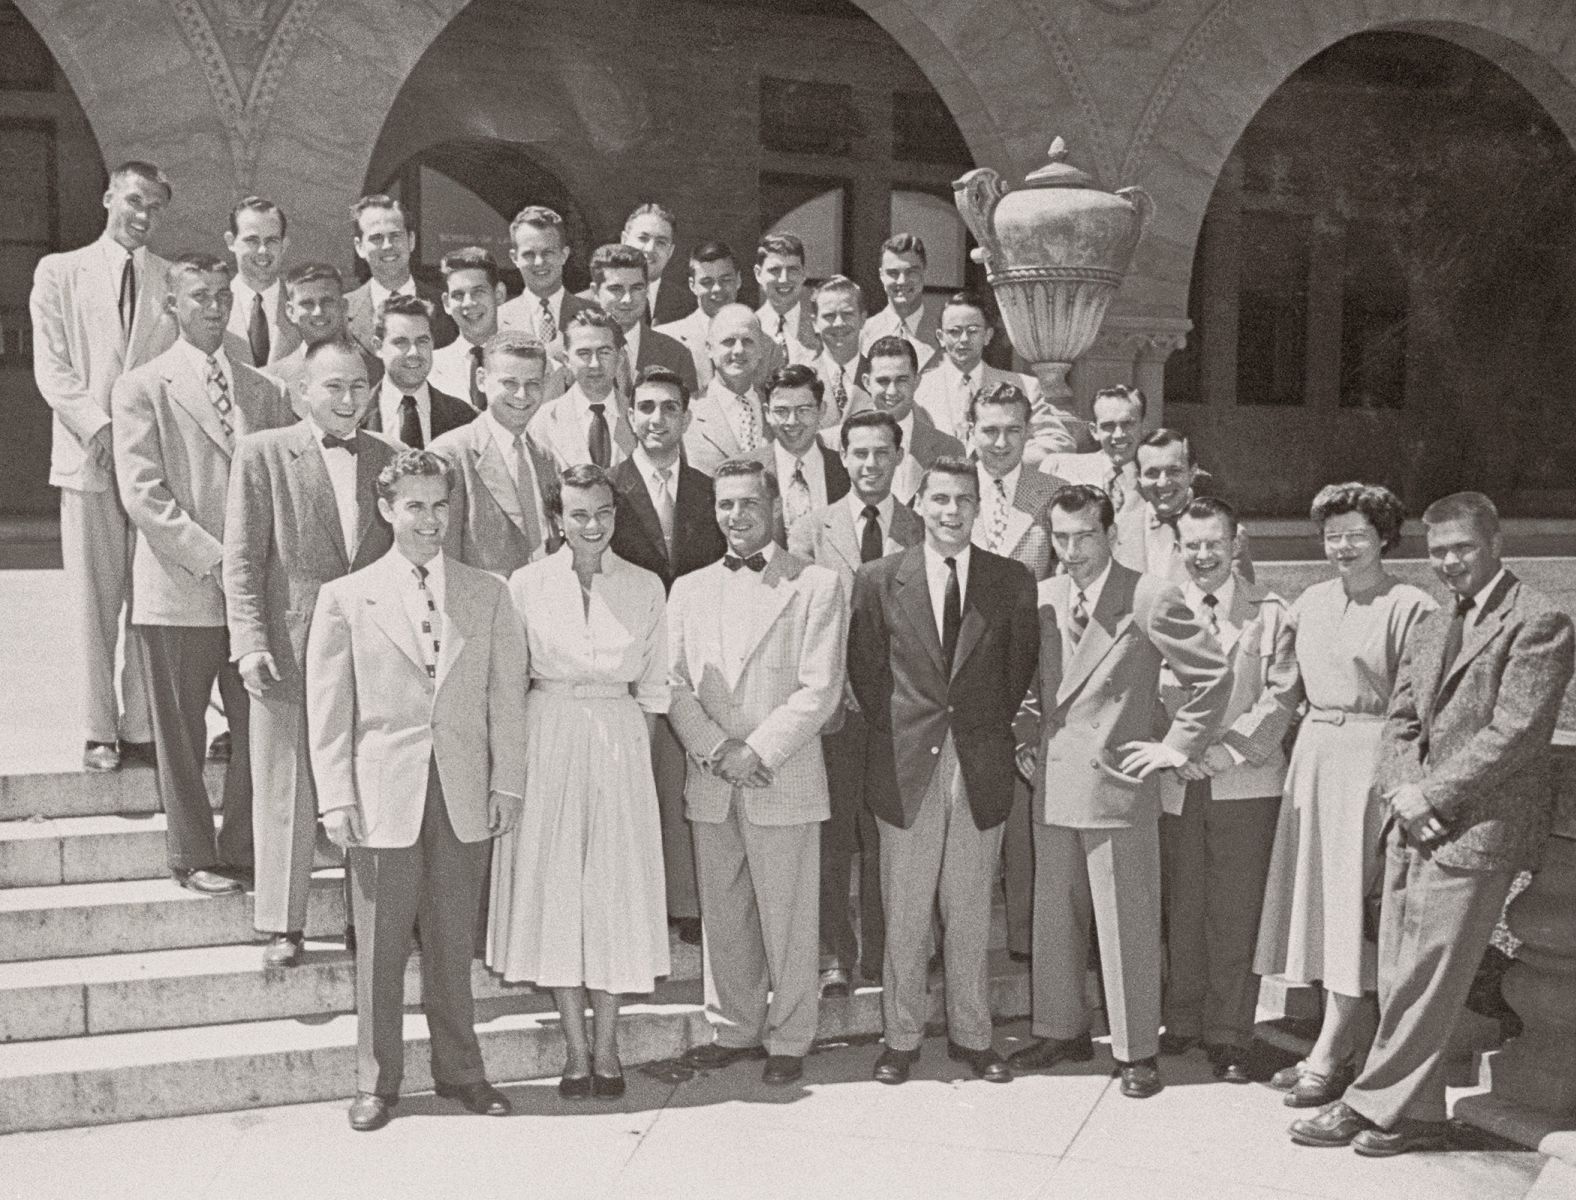 O'Connor is seen second from left in the first row as she poses with other members of her Stanford Law School class in 1952. Another future Supreme Court justice, William Rehnquist, is in the back row on the far left.